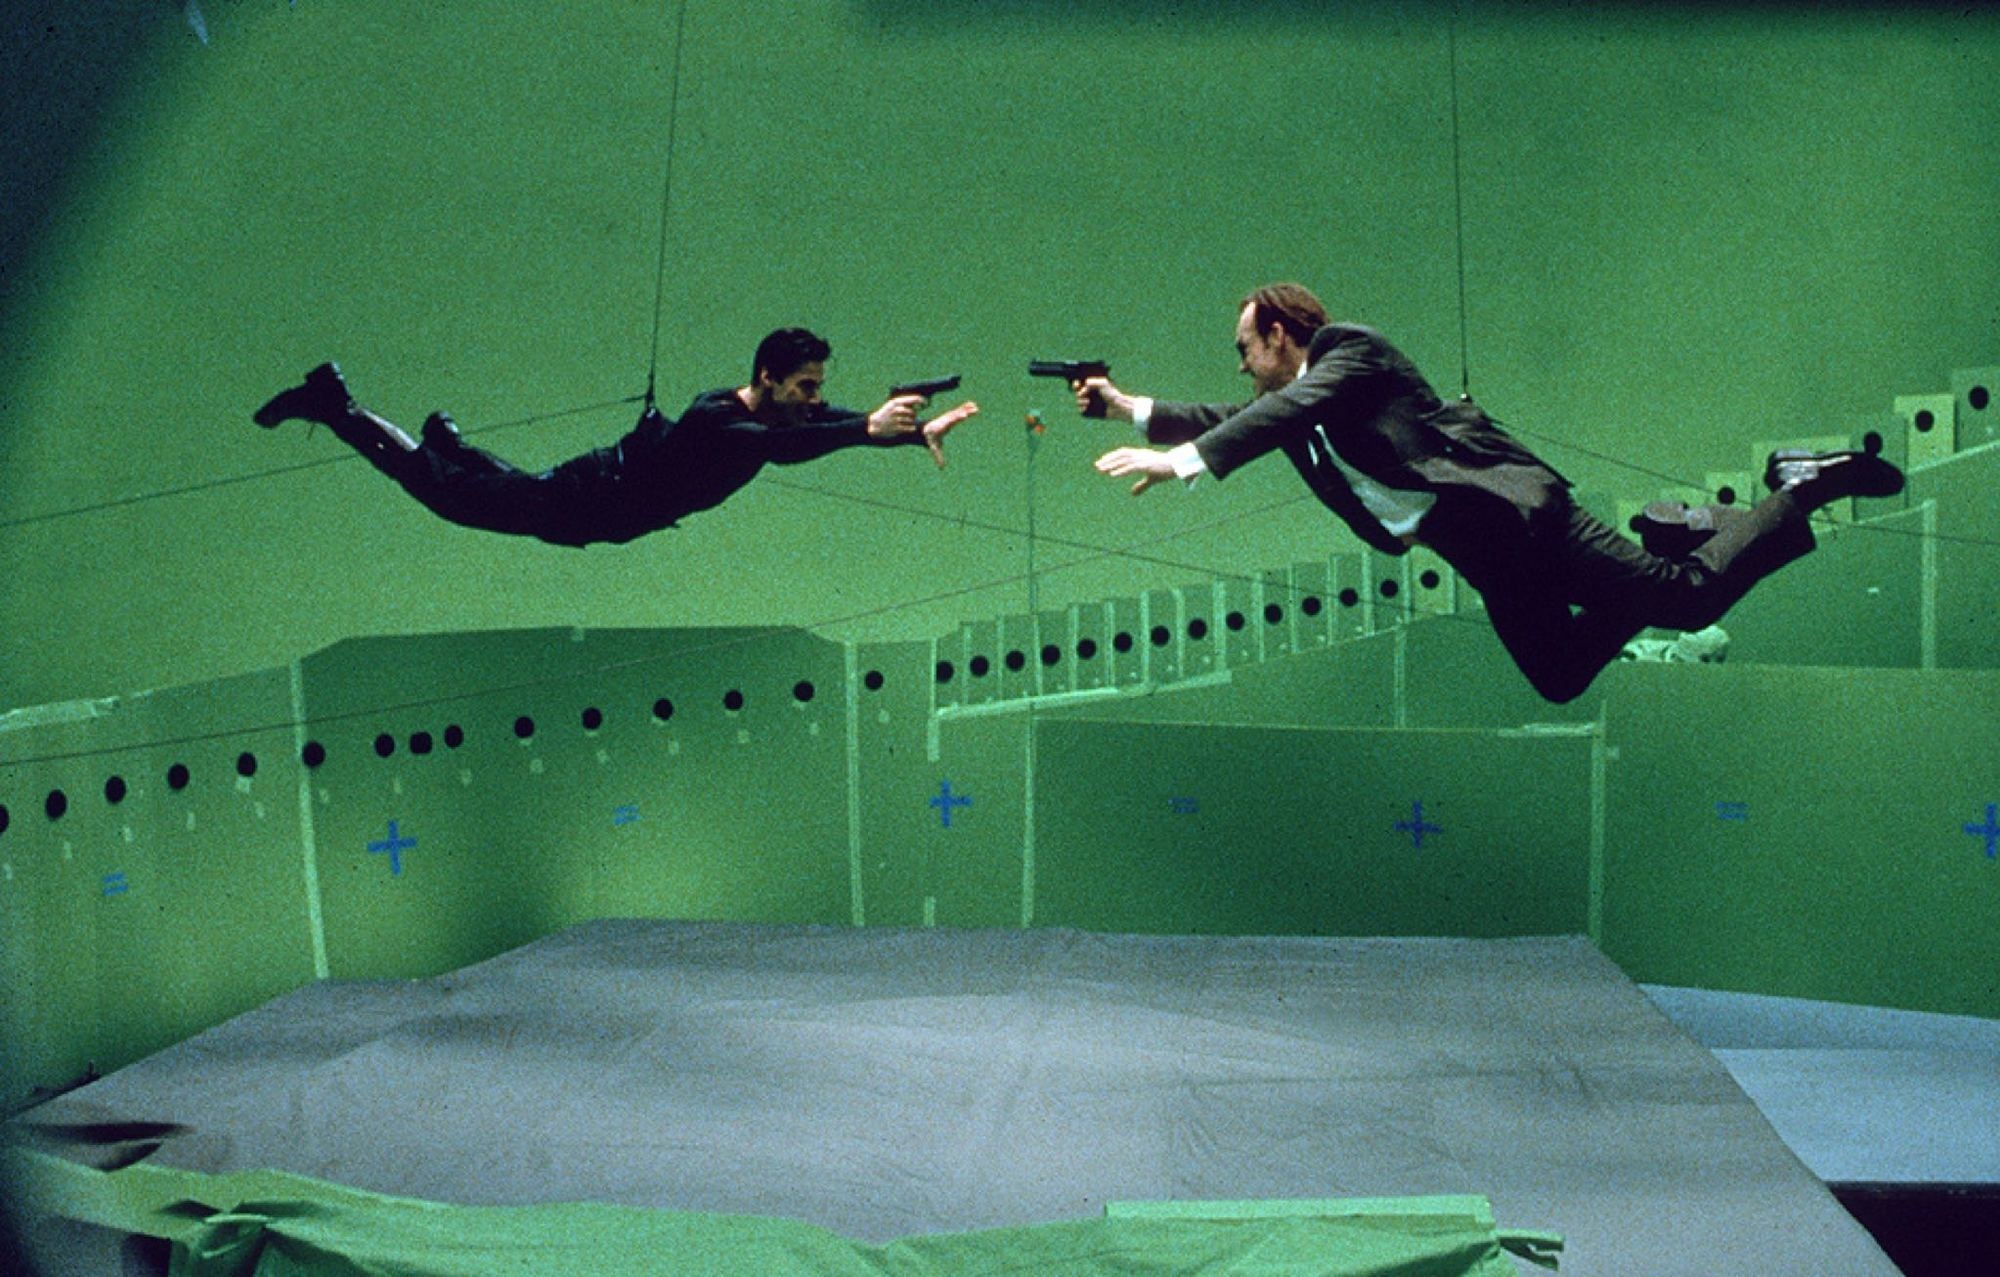 Keanu Reeves and Hugo Weaving shooting at each other in The Matrix.